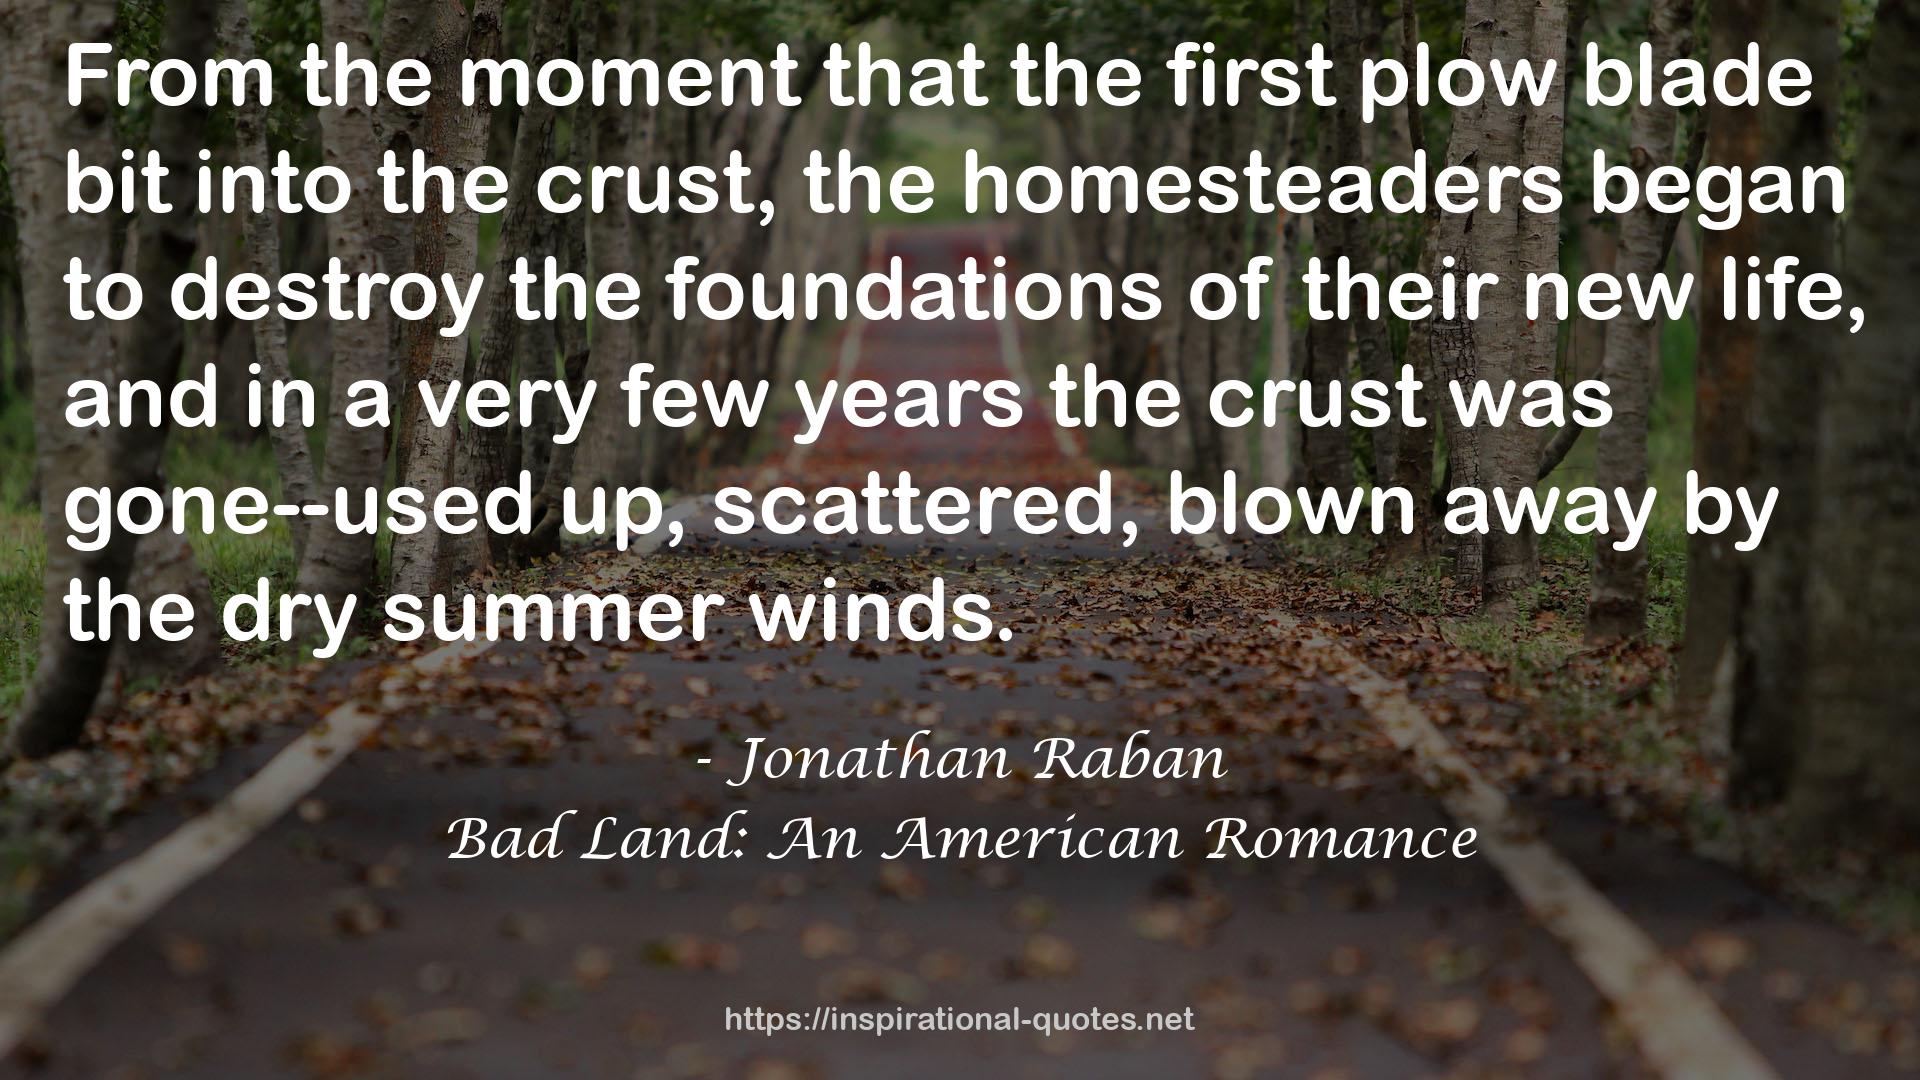 Bad Land: An American Romance QUOTES